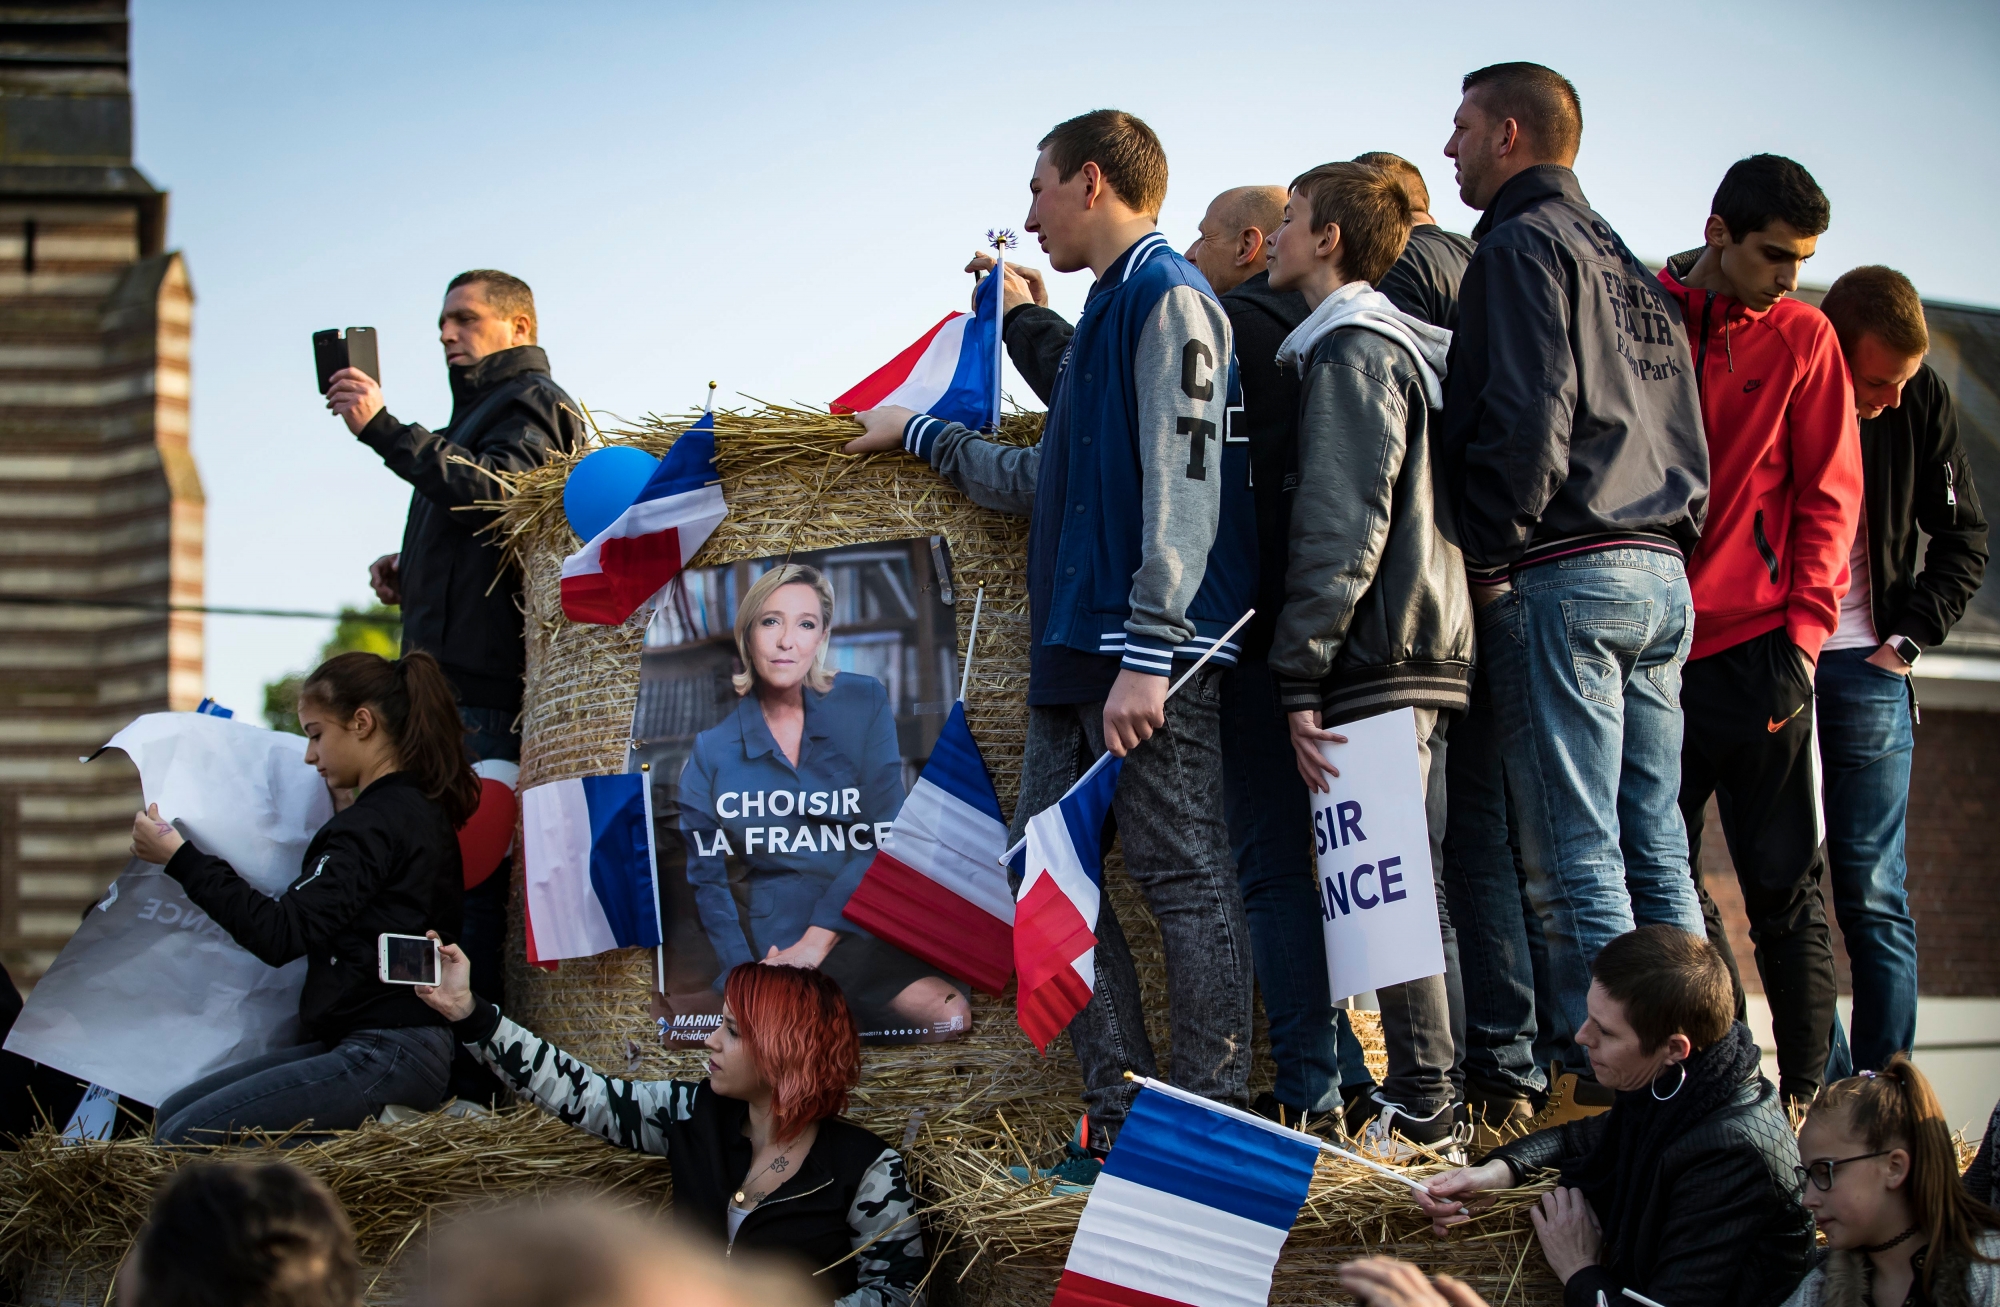 epa05944359 Supporters of French presidential election candidate the far-right Front National (FN) party, Marine Le Pen, as they listen to her speech at an outdoor campaign rally  in Ennemain, Northern France, 04 May 2017.  France will hold the second round of the Presidential election campaign on 07 May 2017. Sign reads 'Choose France', Le Pen's campaign slogan.  EPA/IAN LANSGSDON FRANCE PRESIDENTIAL ELECTIONS